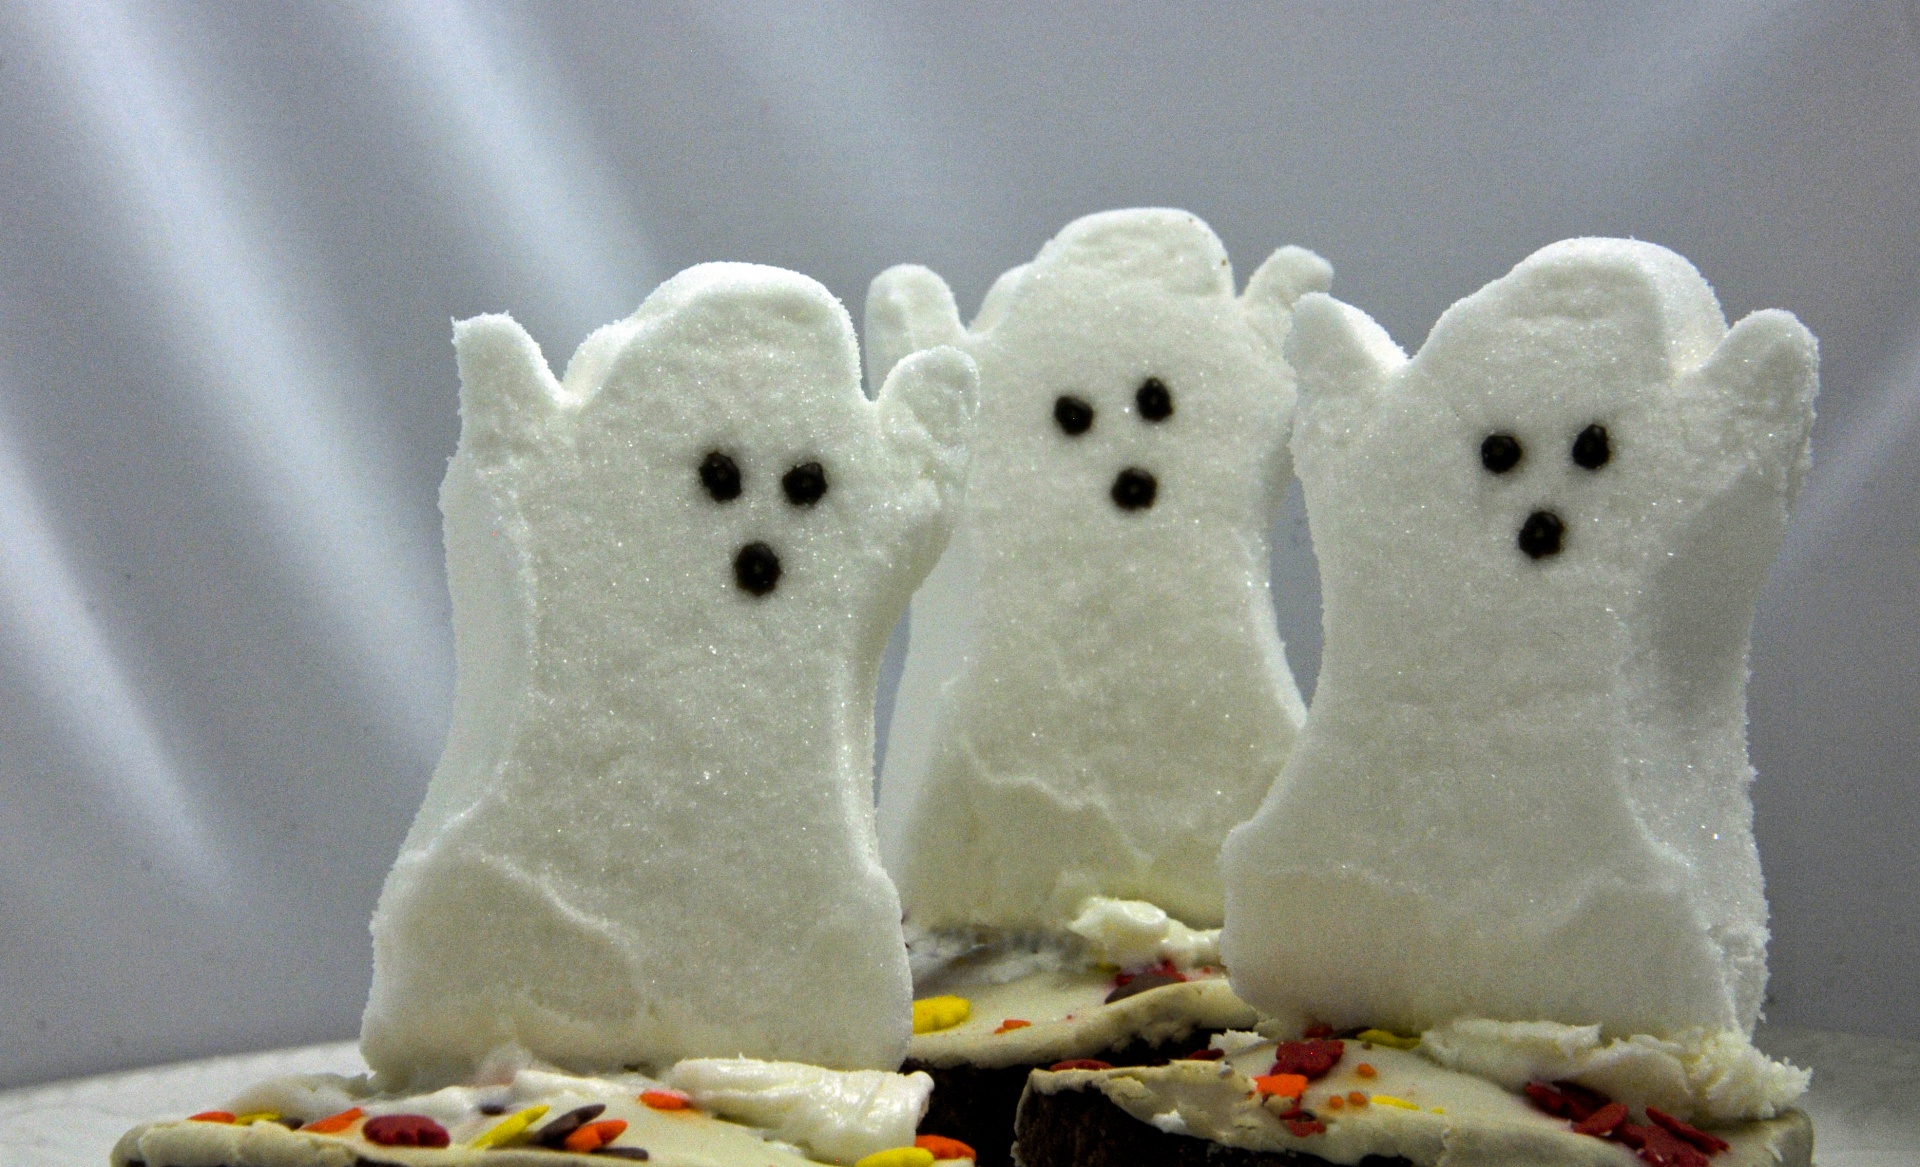 Halloween Cupcakes Free Stock Photo - Public Domain Pictures